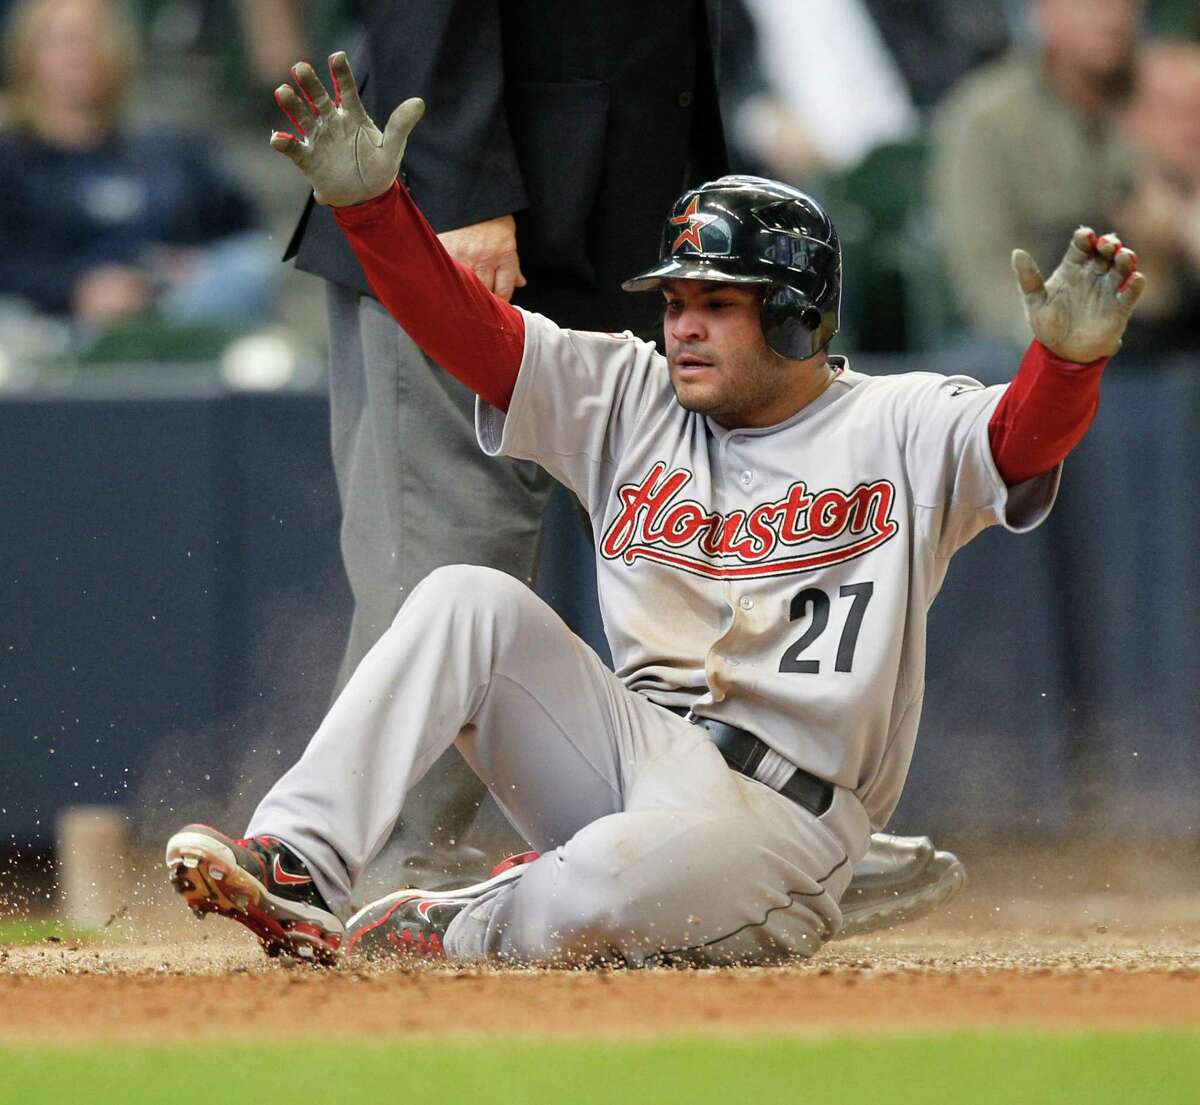 Houston Astros' Jose Altuve scores on an RBI single by the Astros' J.D. Martinez during the eighth inning of a baseball game against the Milwaukee Brewers, Wednesday, April 25, 2012, in Milwaukee. (AP Photo/Jeffrey Phelps)